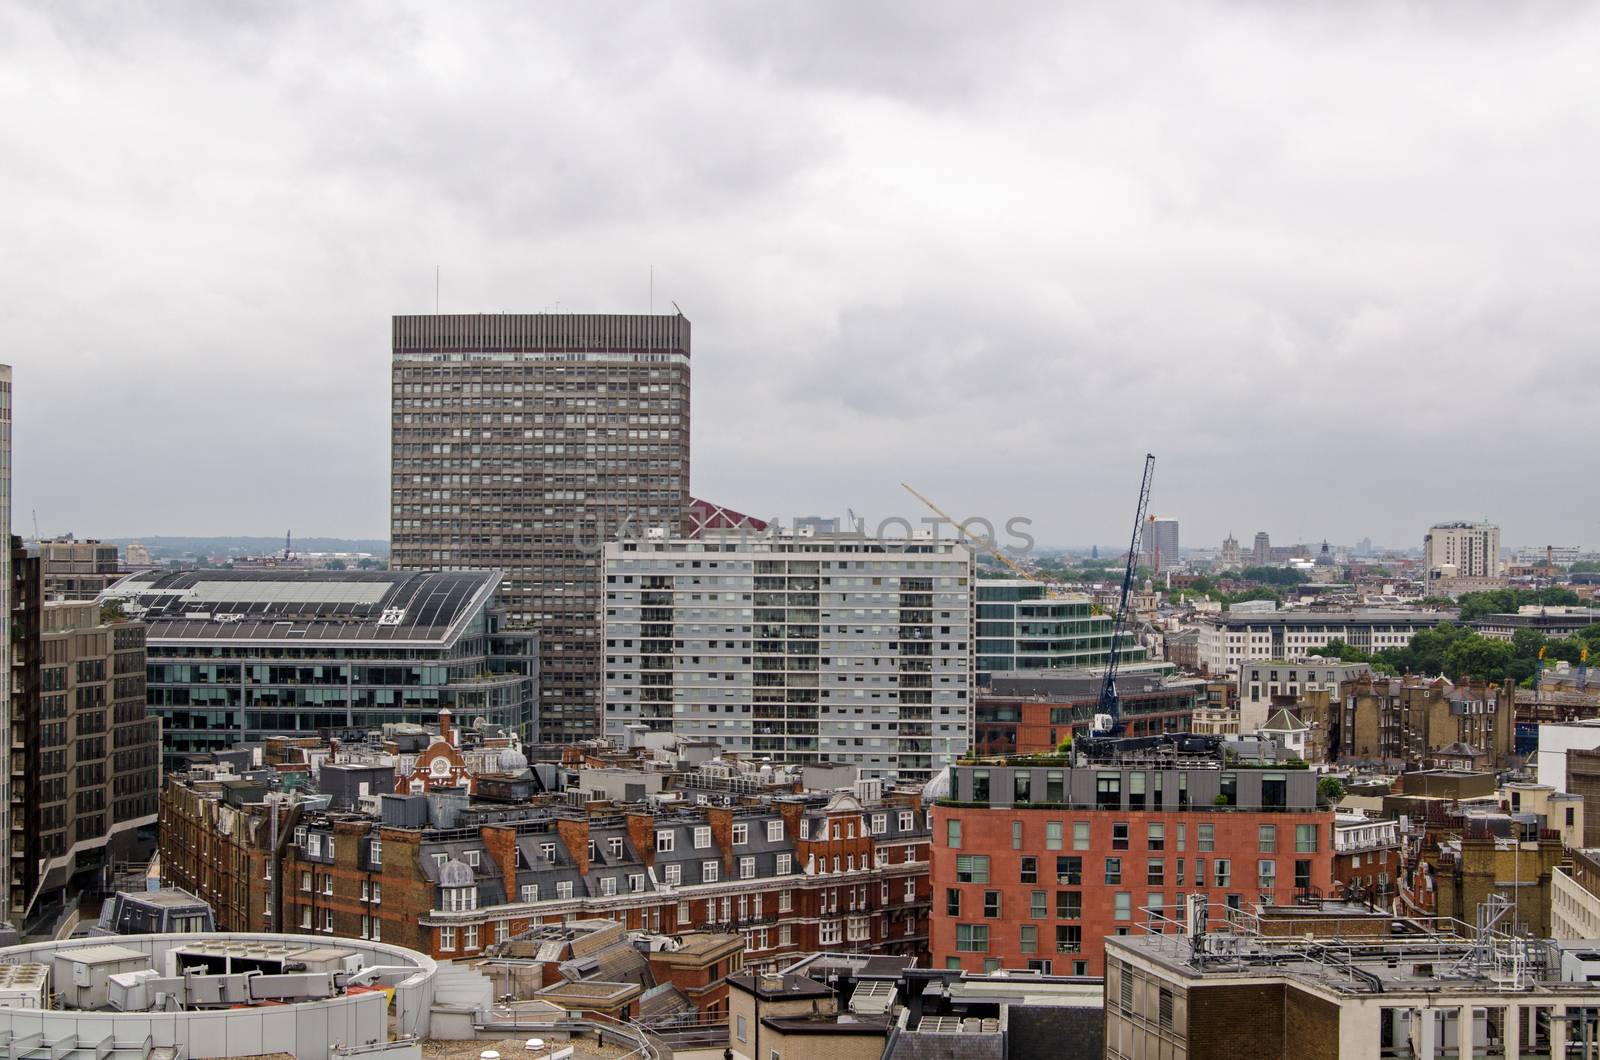 Office and apartment blocks in the Victoria district of London.  Tallest is Portland House, home to many companies and in front a block of flats now known as 'The View'.  